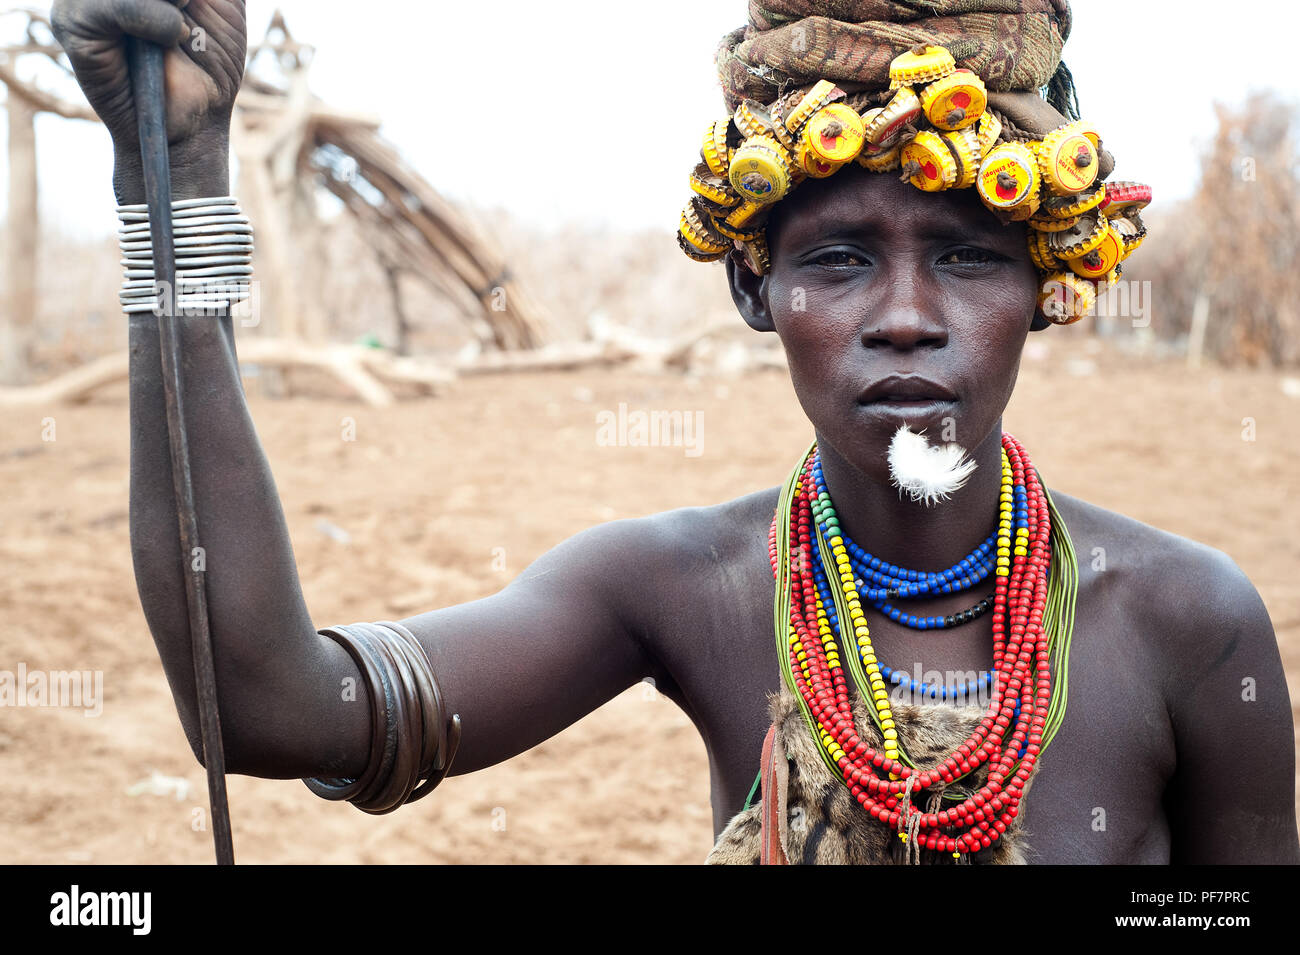 Woman from the Dassanech tribe ( Ethiopia) Stock Photo